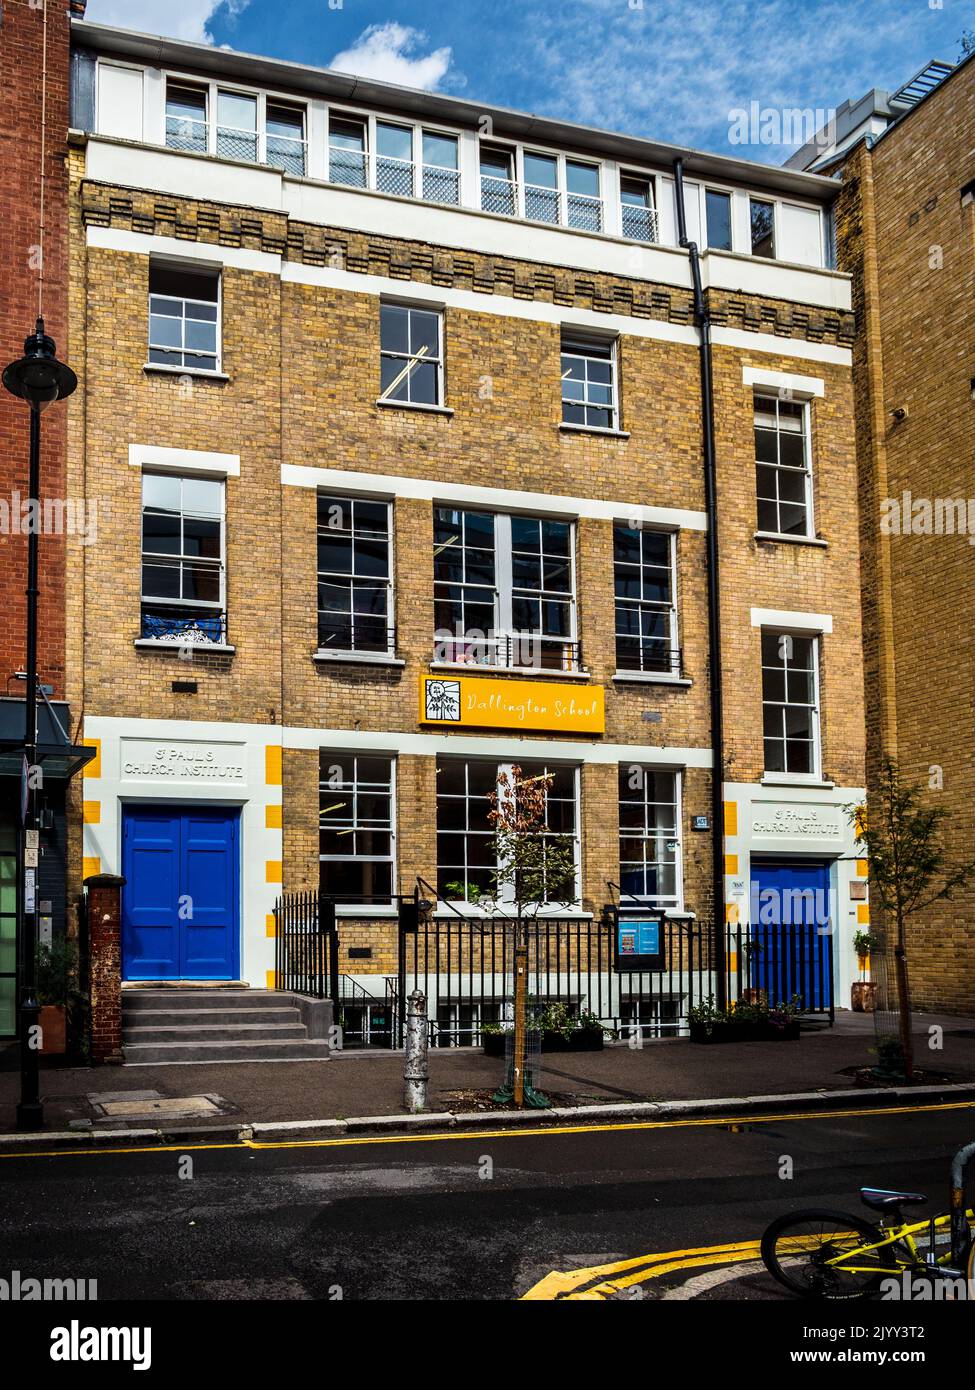 Dallington School Clerkenwell at 8 Dallington Street, Clerkenwell, Central London. Independent primary school and nursery in Clerkenwell, founded 1978. Stock Photo